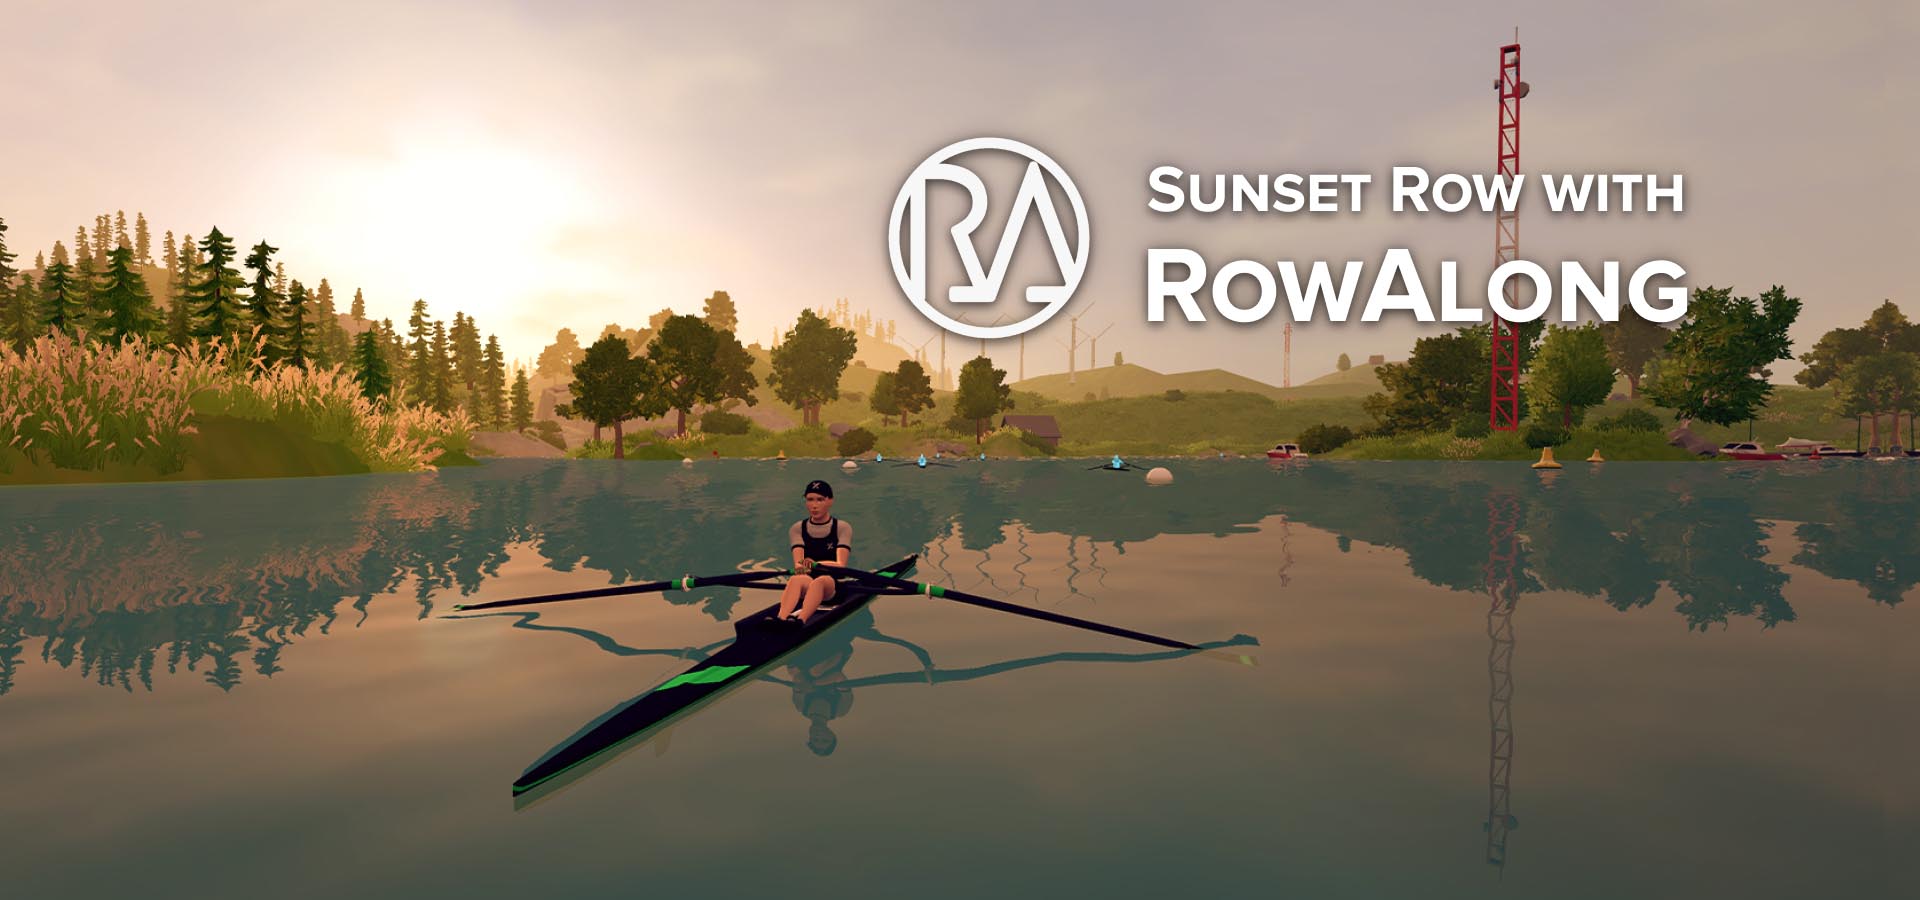 Rowing with sunset on EXR